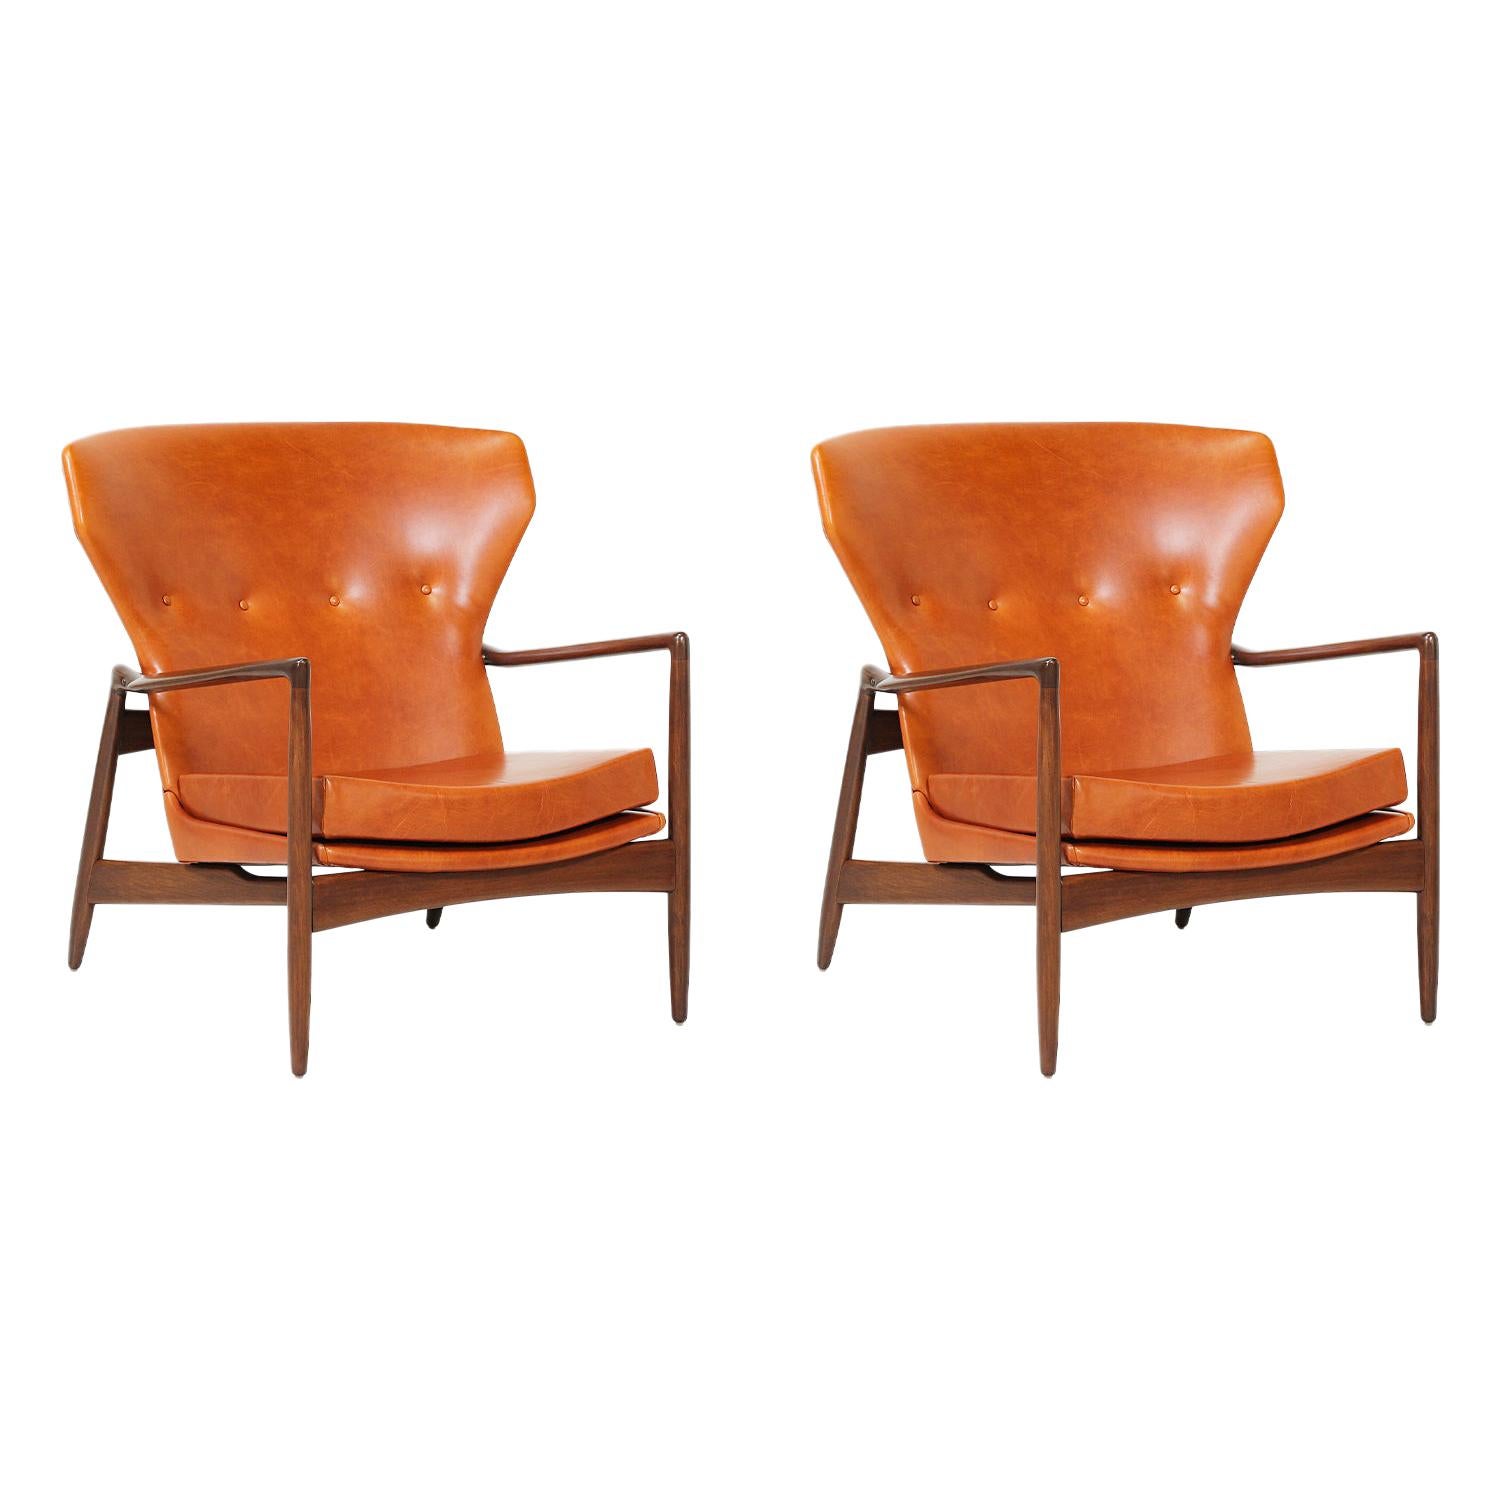 Ib Kofod-Larsen Leather Wing Back Lounge Chairs for Selig